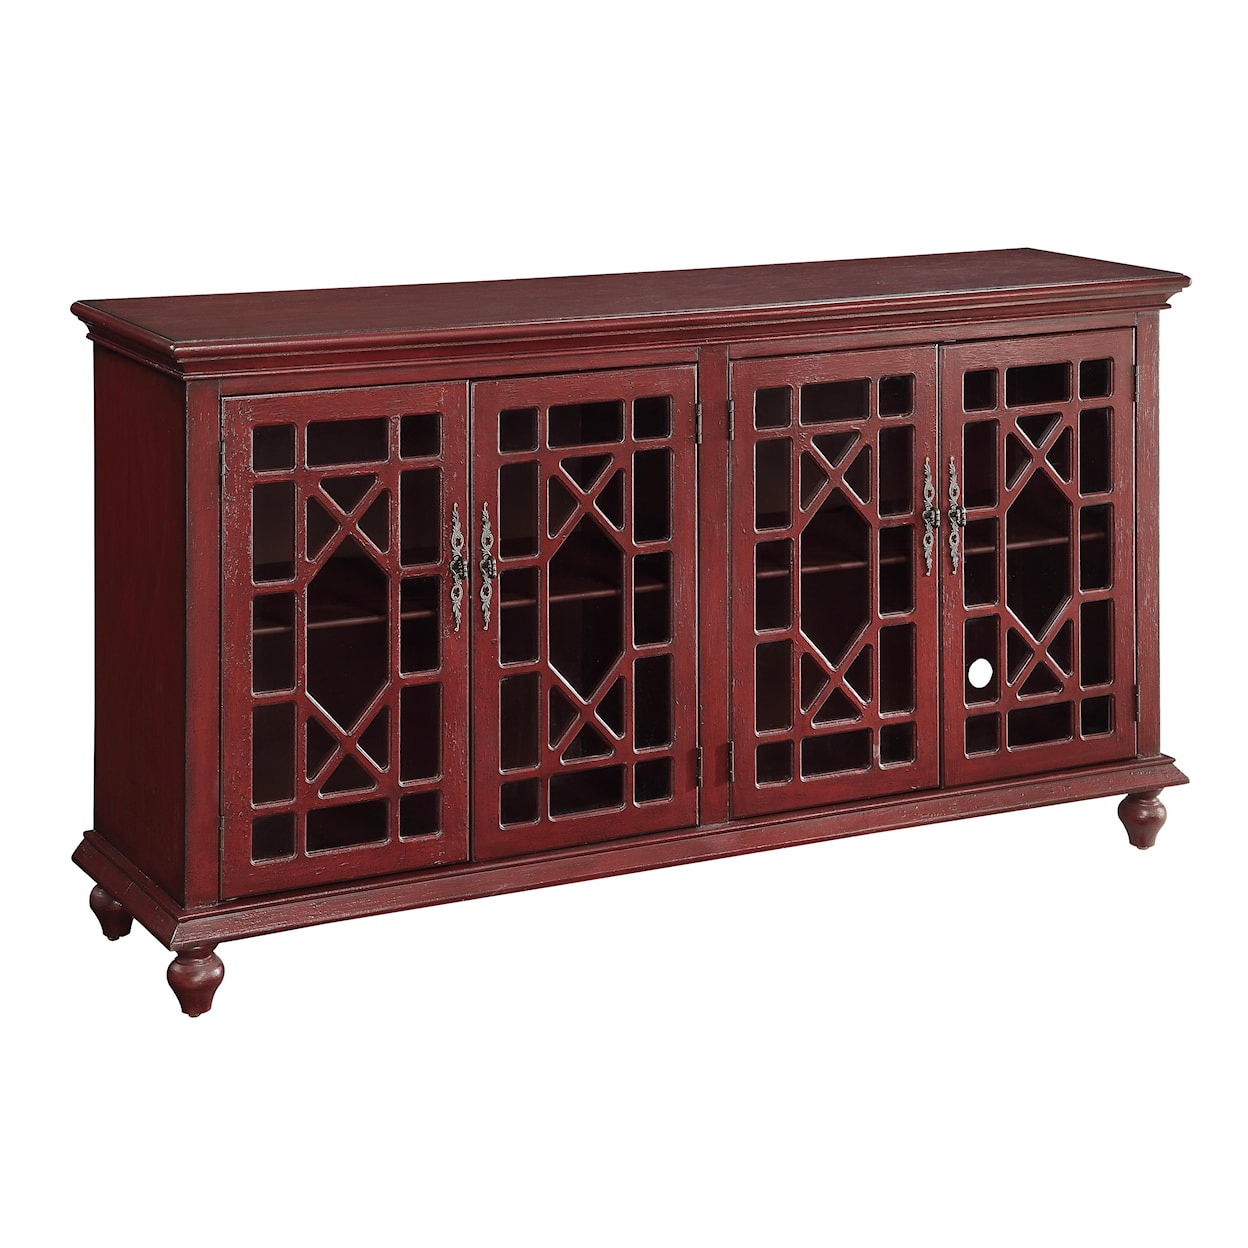 Coast2Coast Home Accents by Andy Stein Four Door Media/Credenza